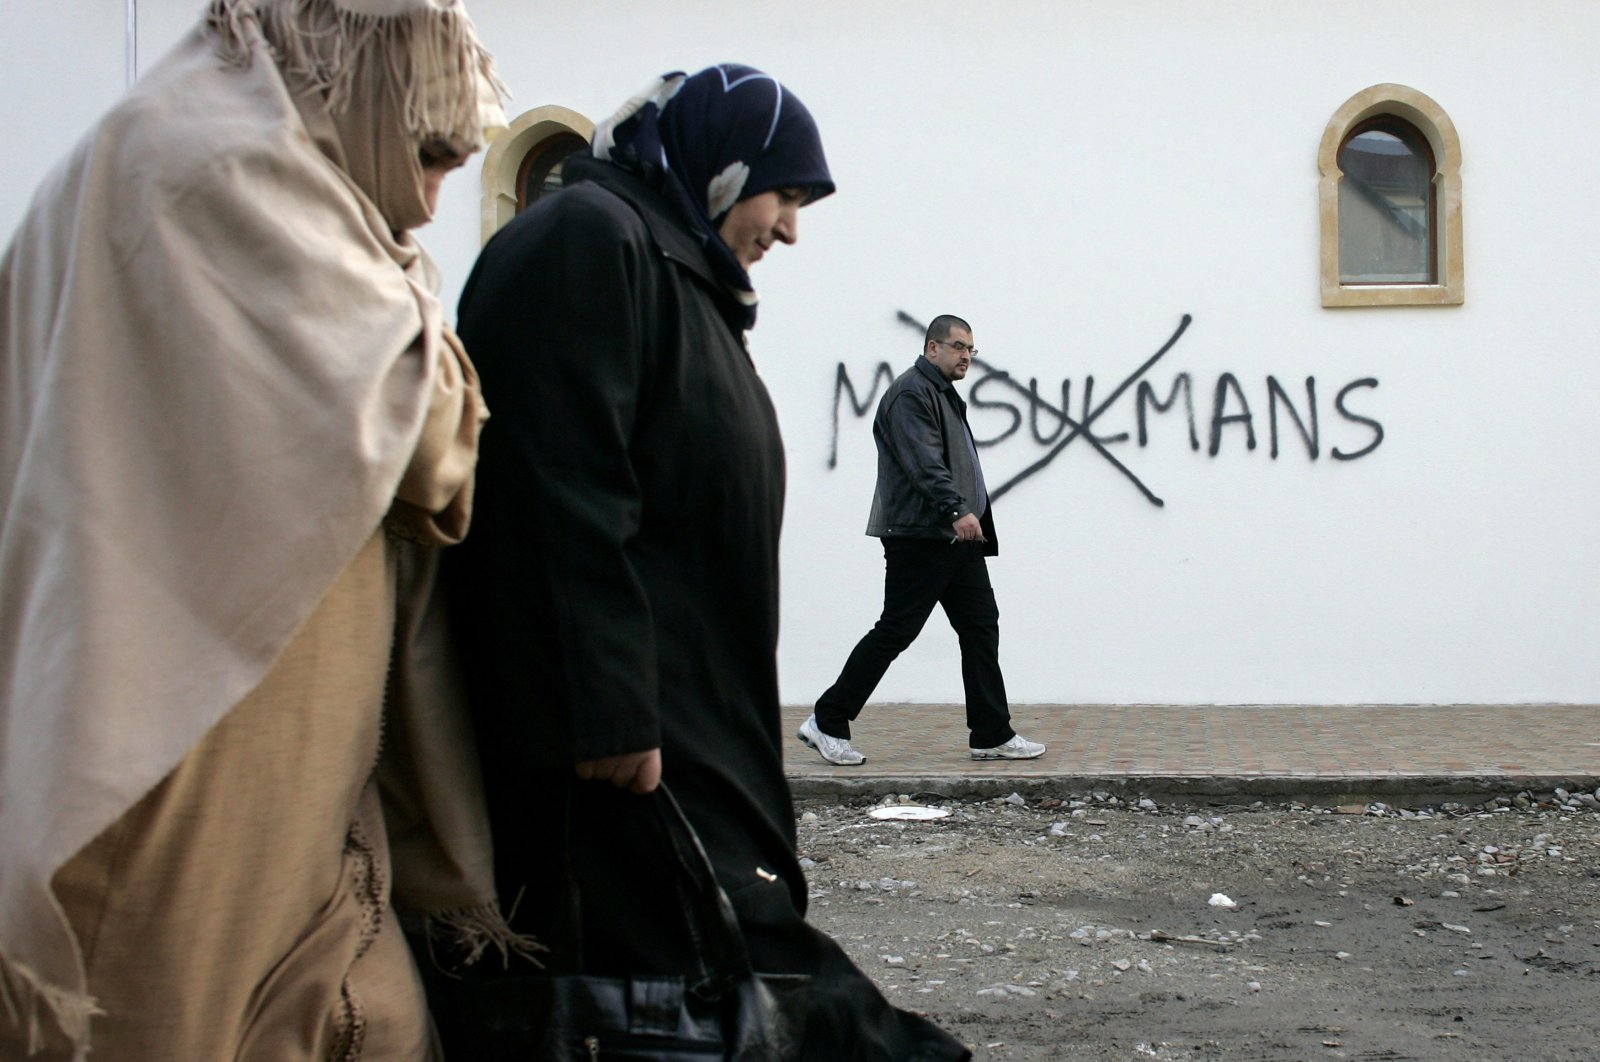 Muslim residents walk past racial slurs painted on the walls of a mosque in the town of Saint-Etienne, central France, Feb. 8, 2010. (AP Photo)